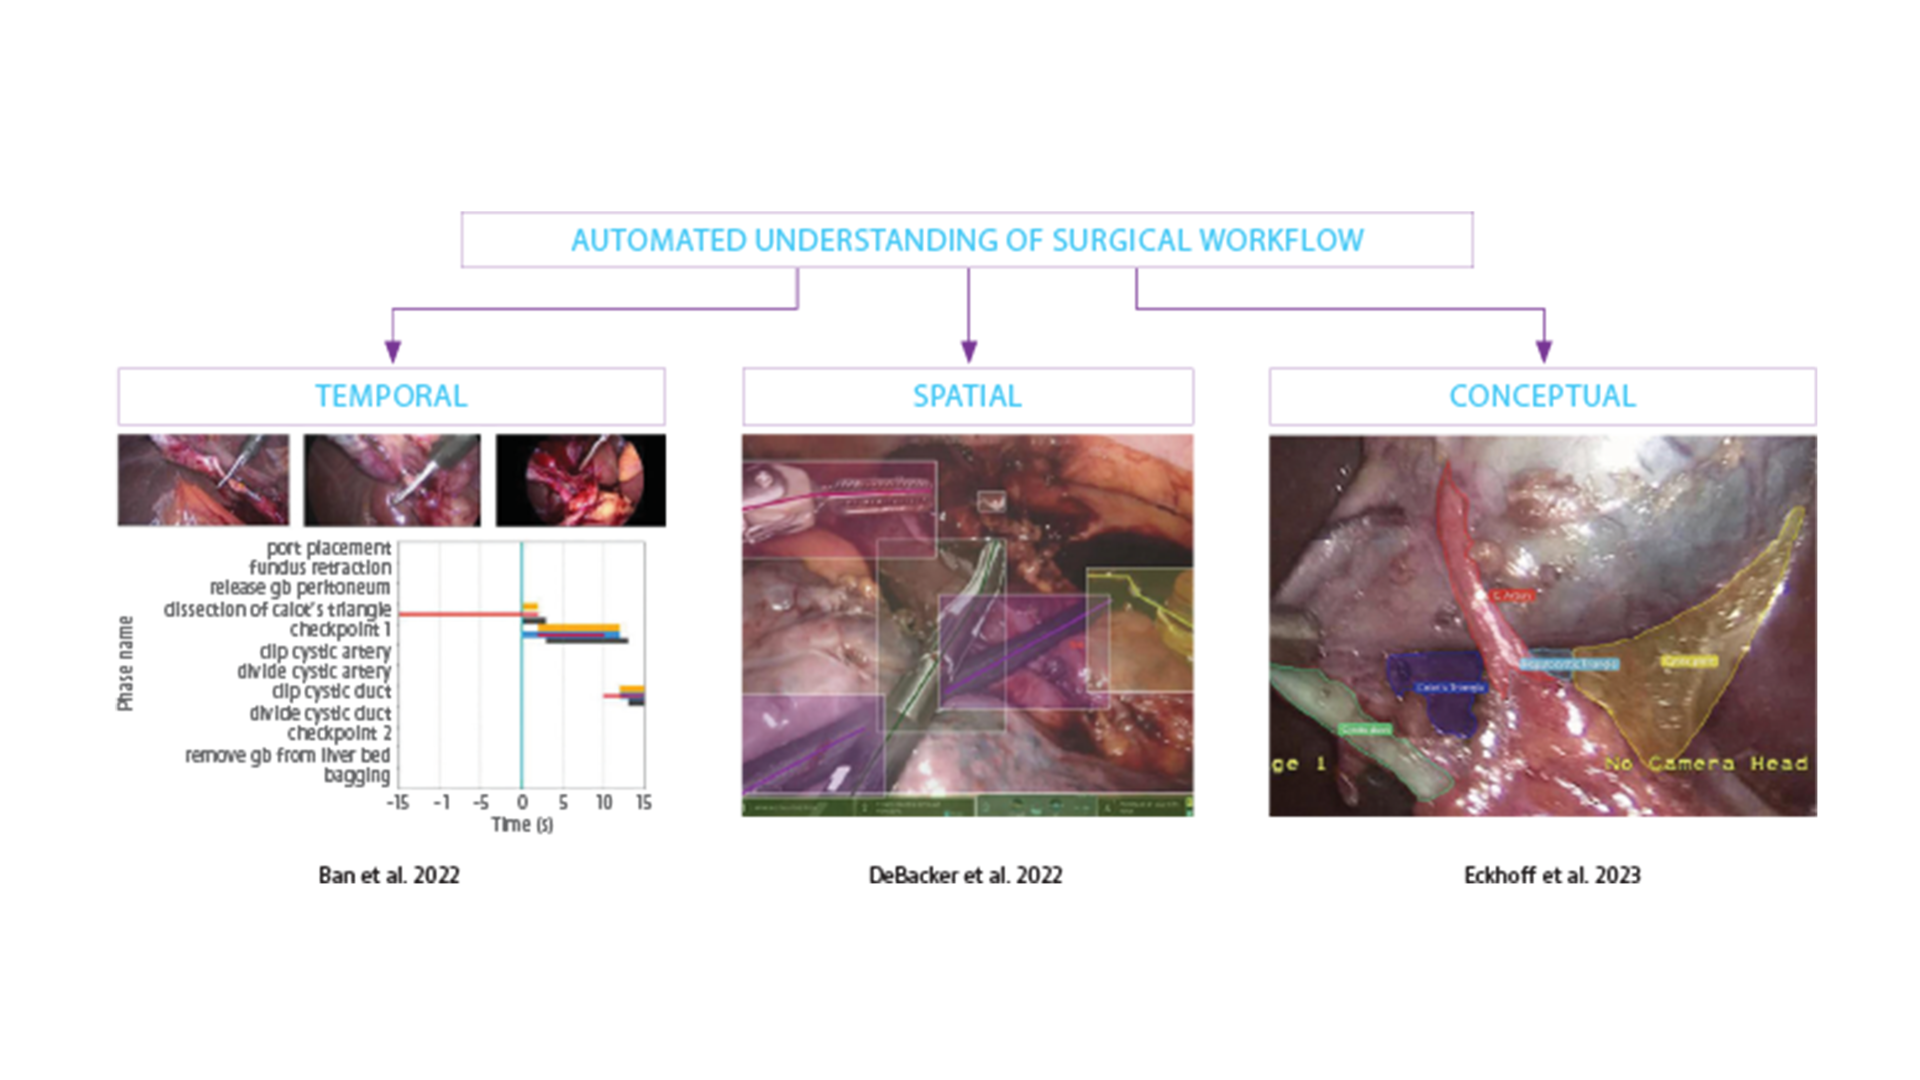 Dr. Jennifer Eckhoff says that through comprehension of spatial, temporal, and conceptual aspects of surgical workflow, AI holds the potential to change minimally invasive surgery.